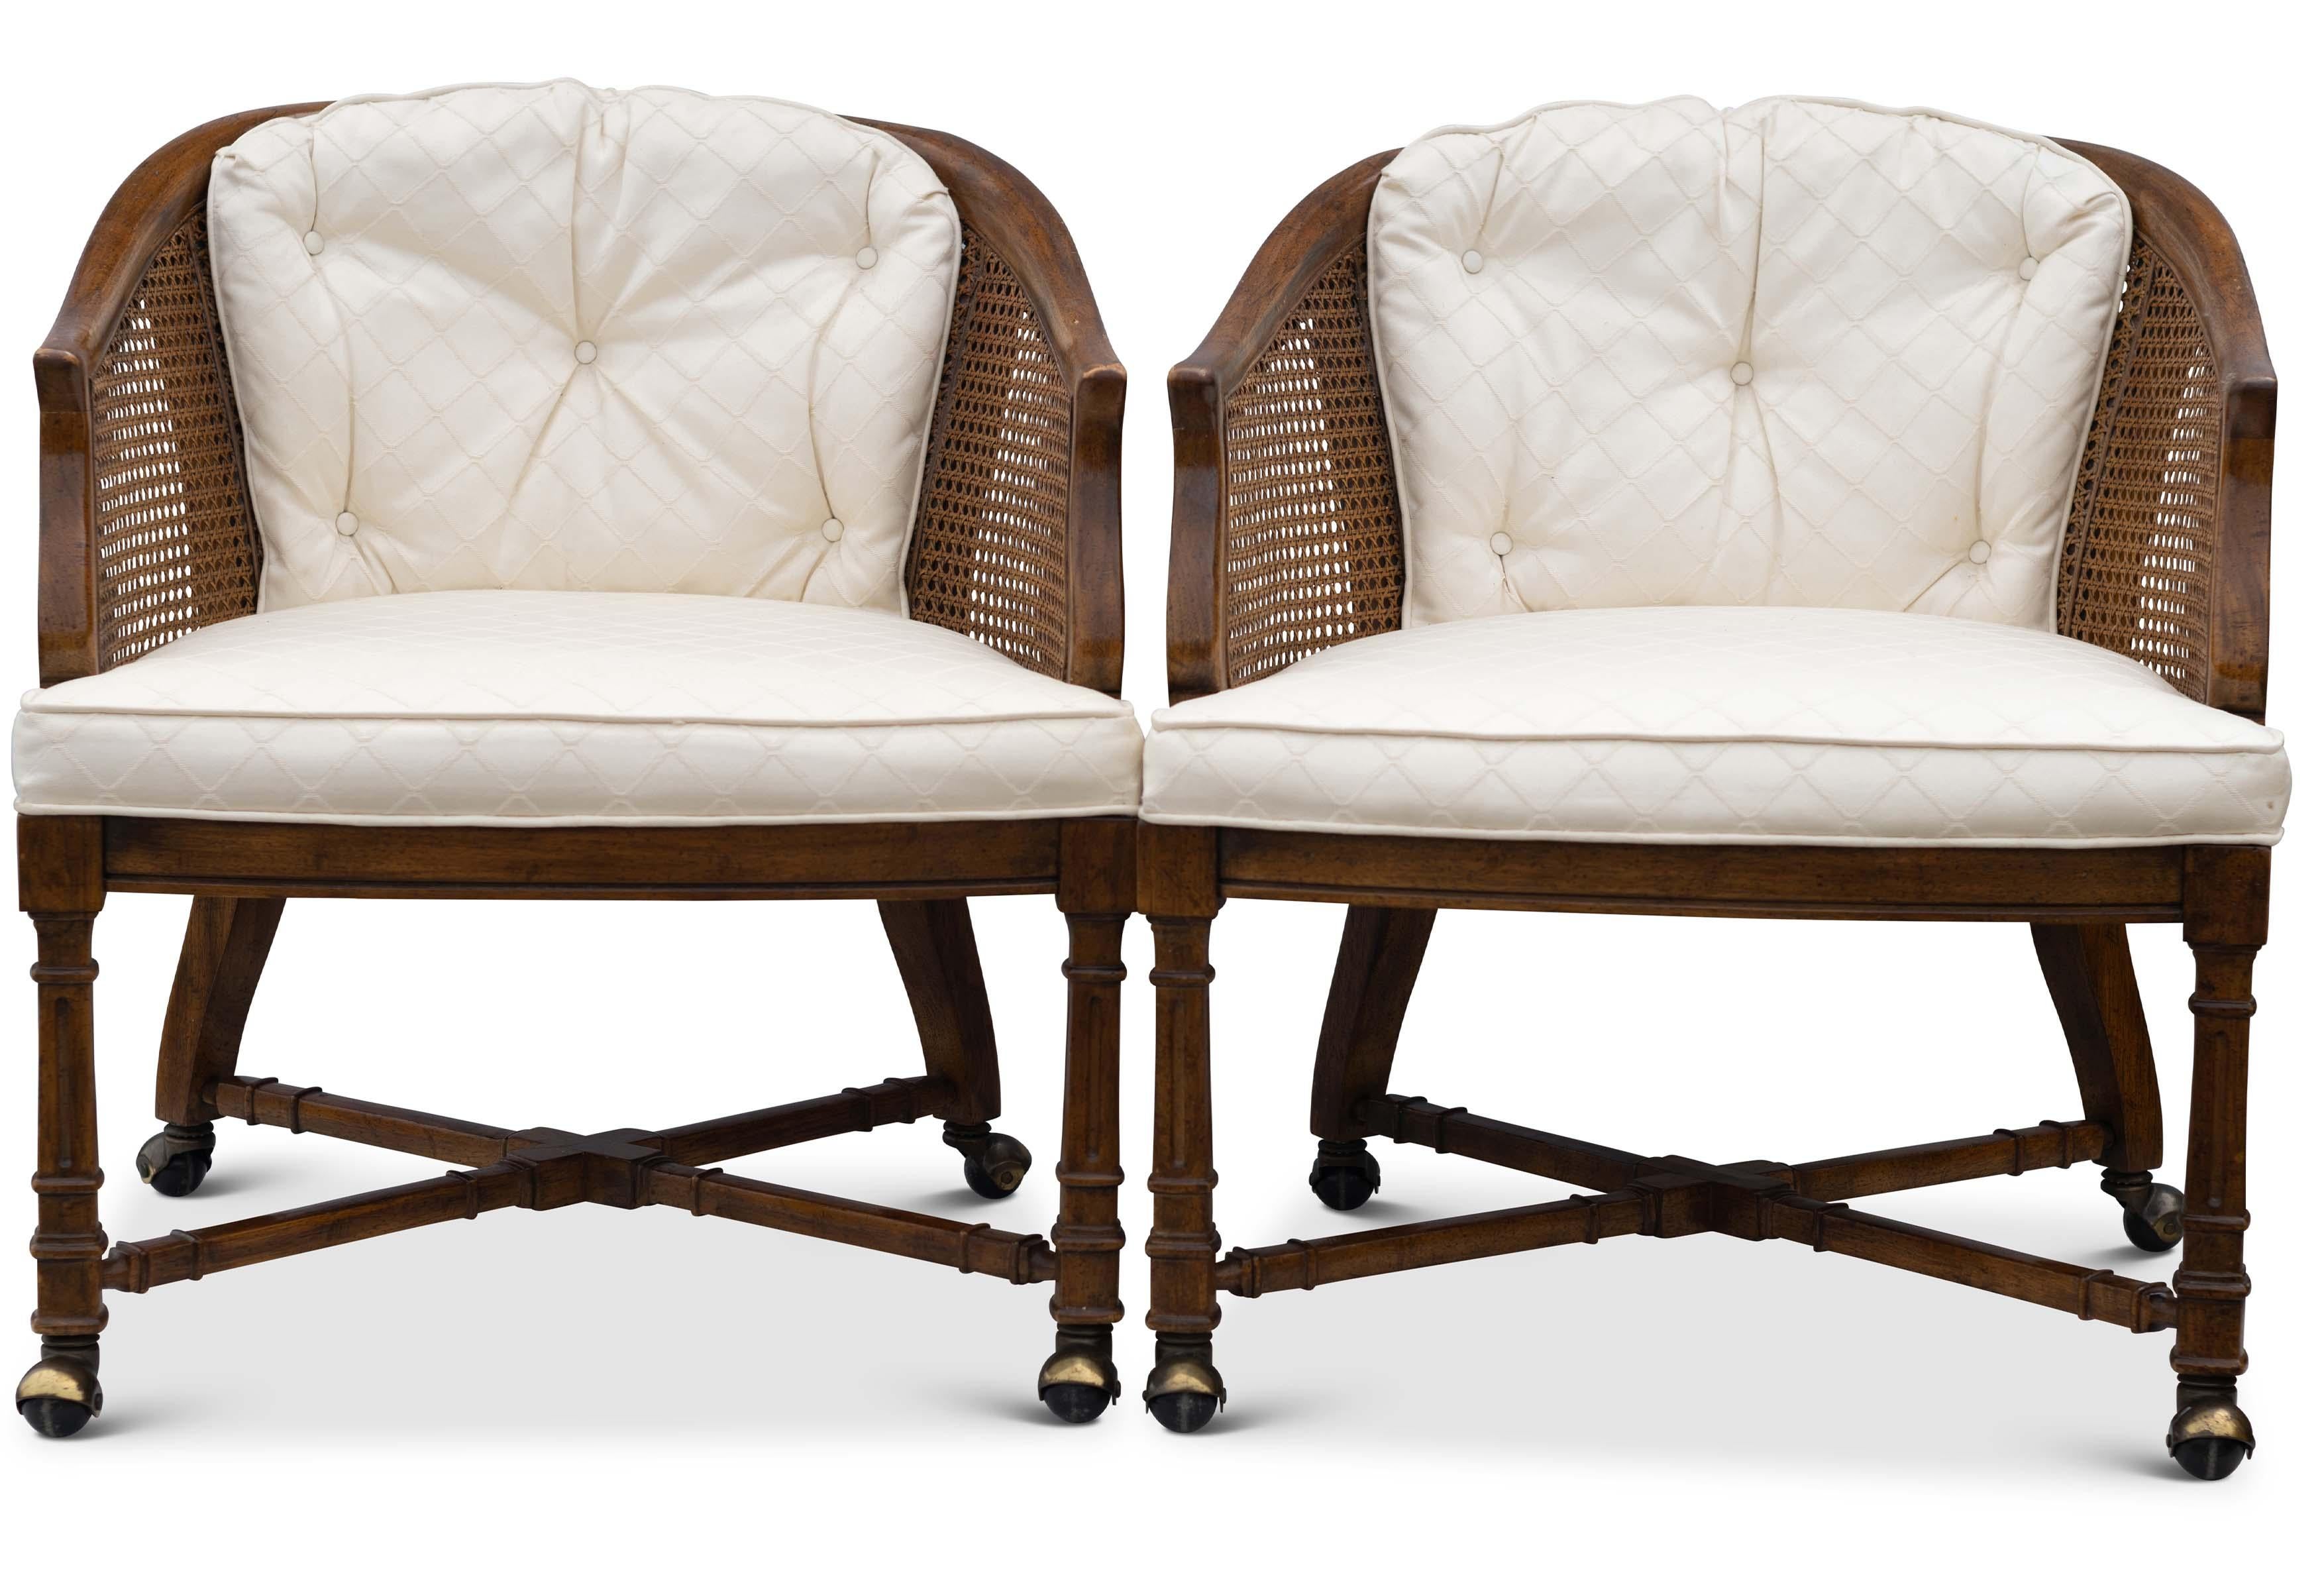 Pair of Faux Bamboo Cane Bergere Armchairs by American of Martinsville In Good Condition For Sale In High Wycombe, GB